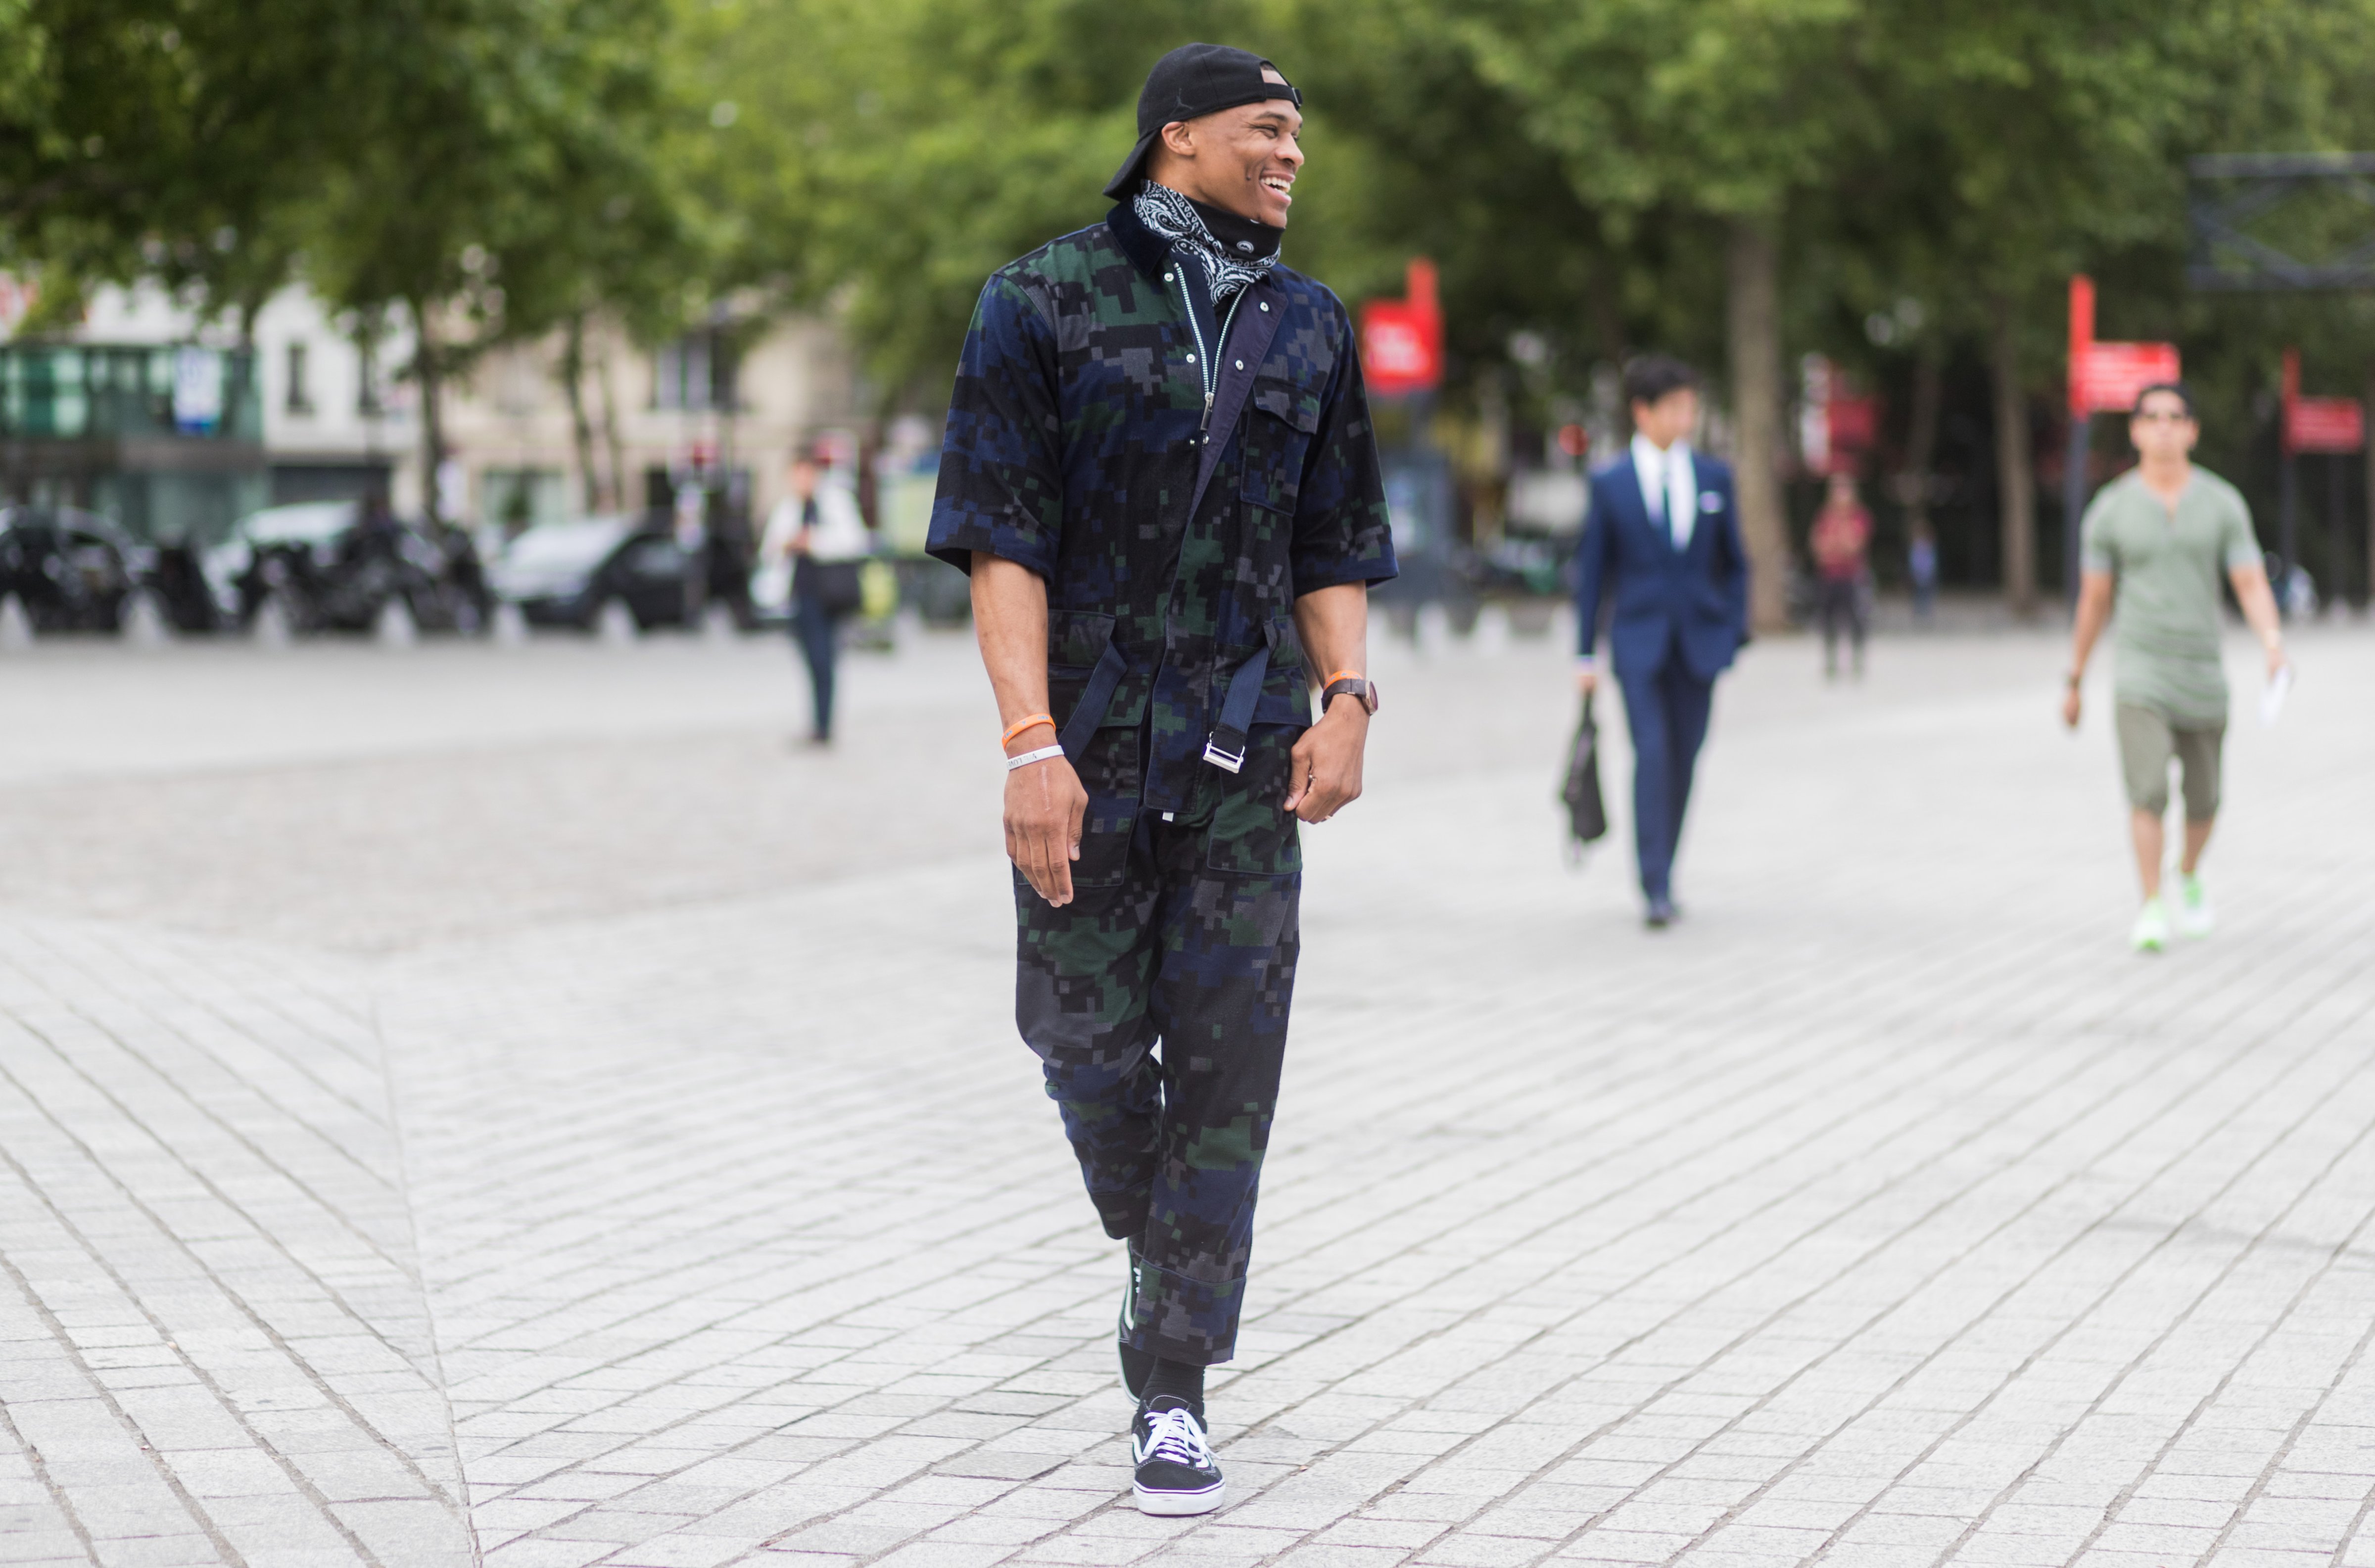 PARIS, FRANCE - JUNE 24: Russell Westbrook outside Sacai during Paris Fashion Week Menswear Spring/Summer 2018 Day Four on June 24, 2017 in Paris, France. (Photo by Christian Vierig/Getty Images) (Christian Vierig—Getty Images)